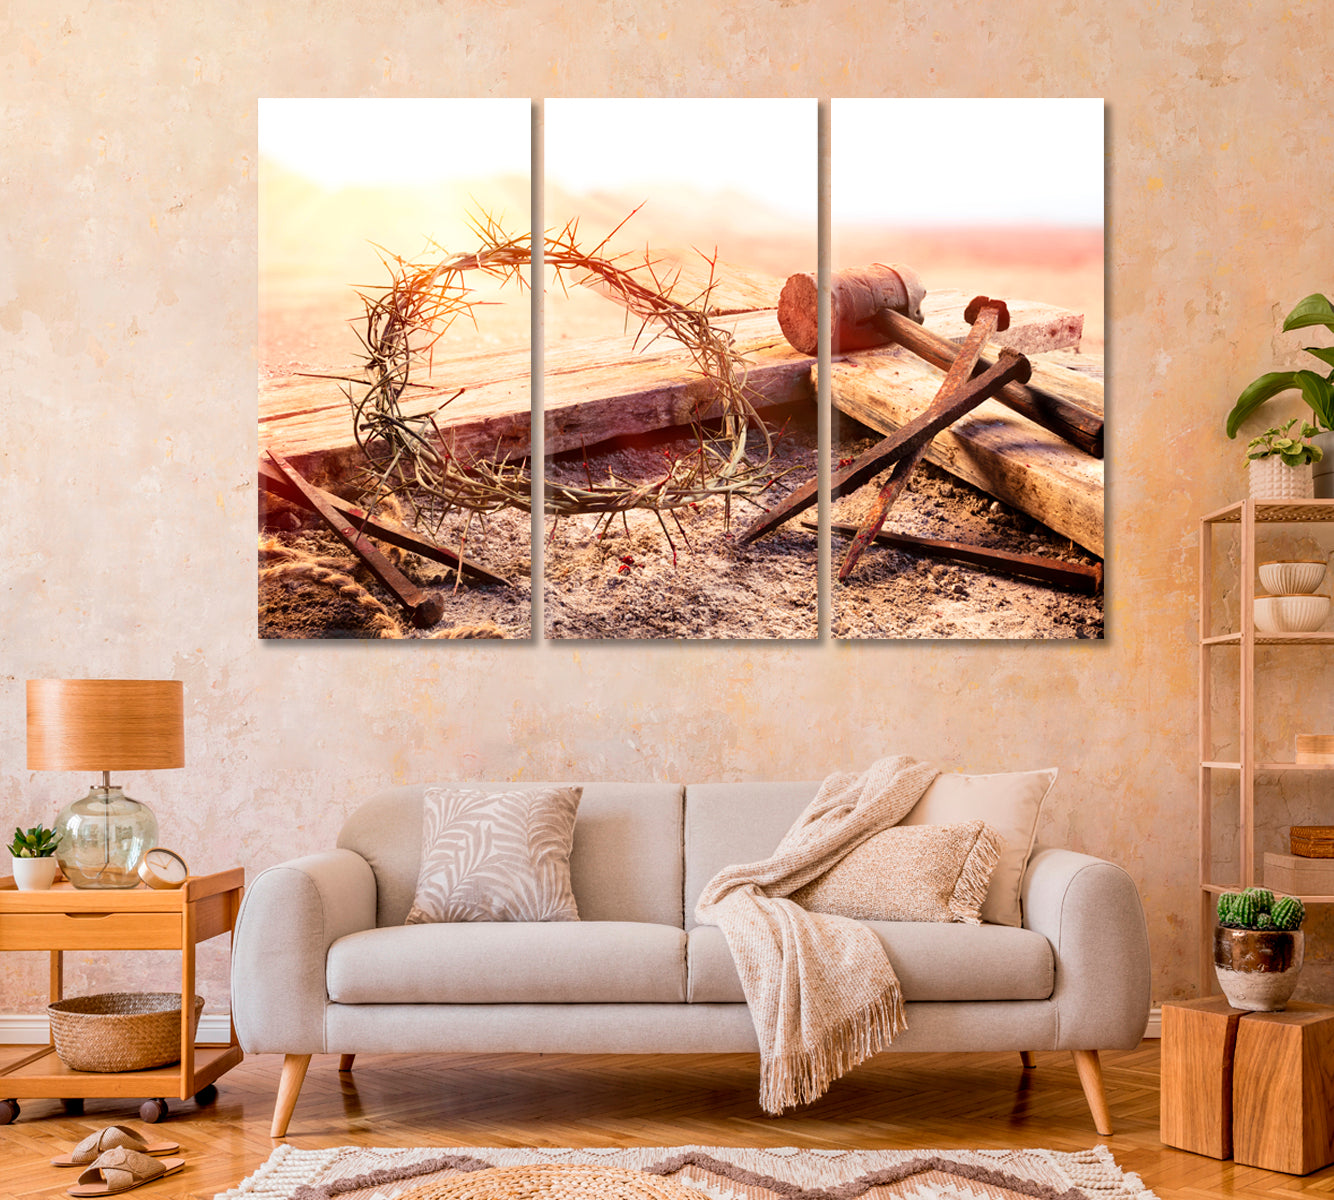 Crucifixion Cross With Crown Of Thorns Canvas Print-Canvas Print-CetArt-1 Panel-24x16 inches-CetArt